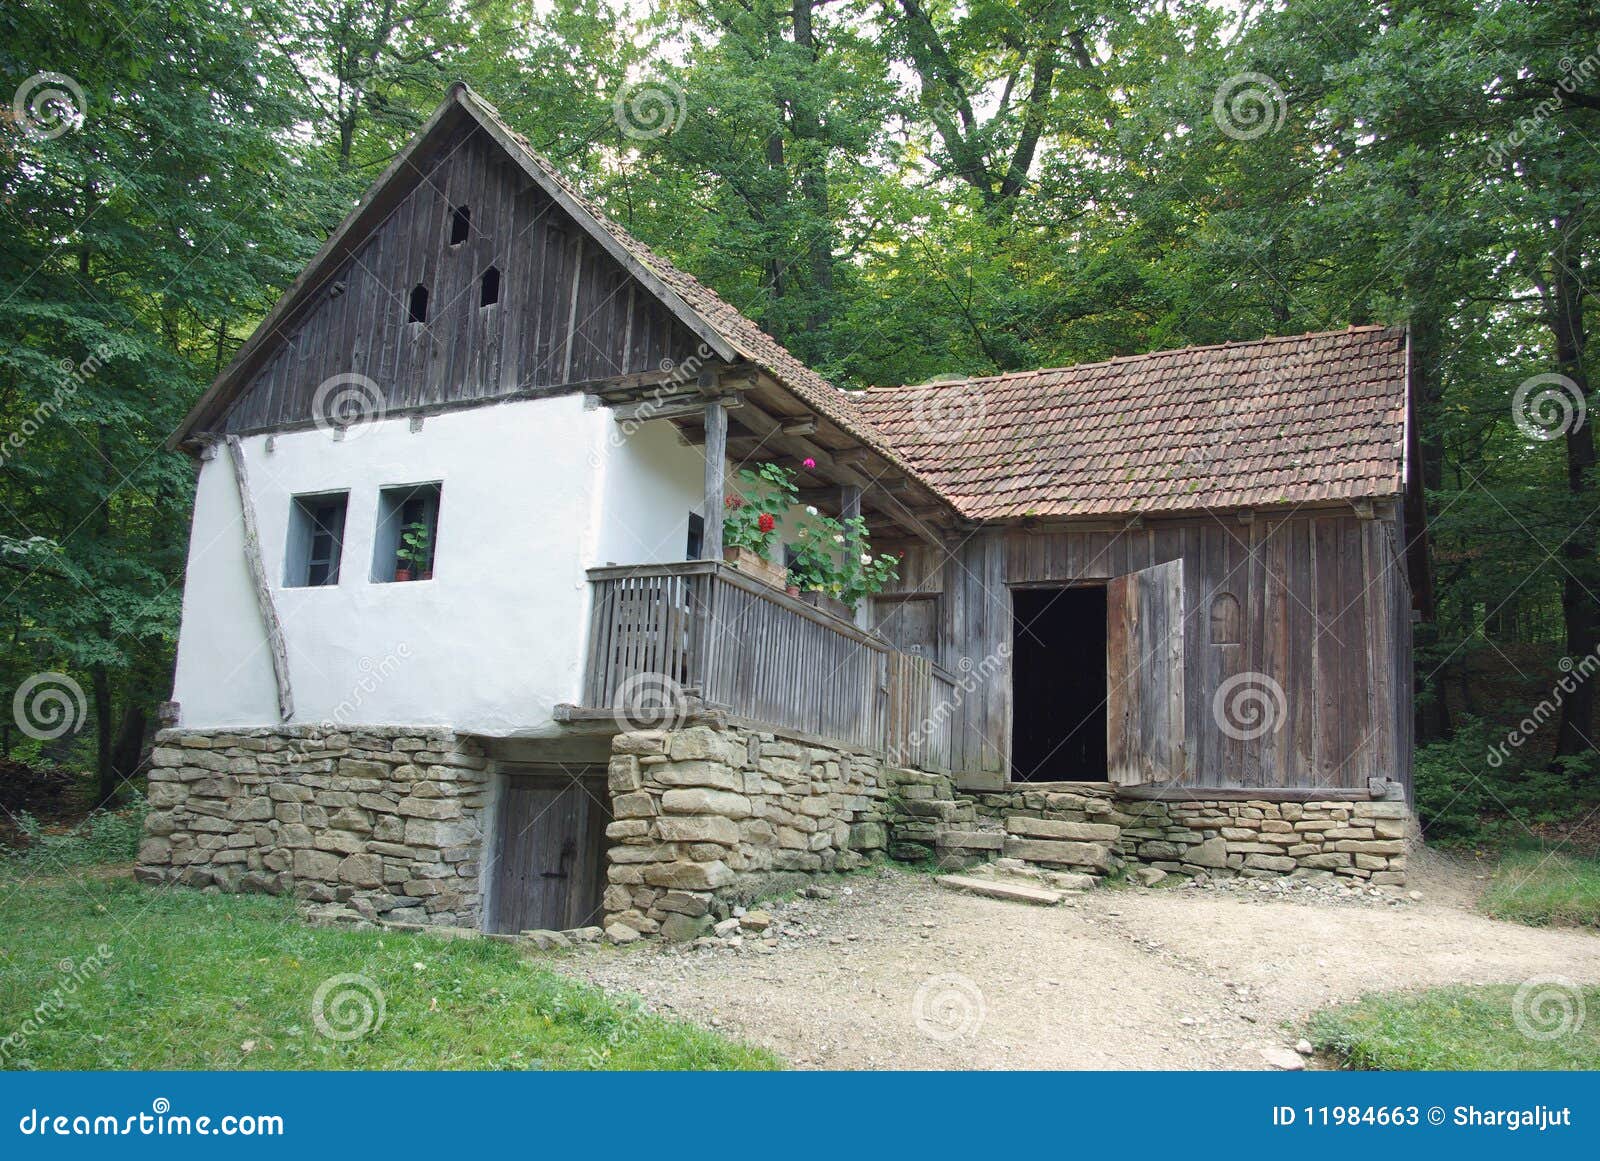 Old Traditional Village House Stock Image - Image of historic, village